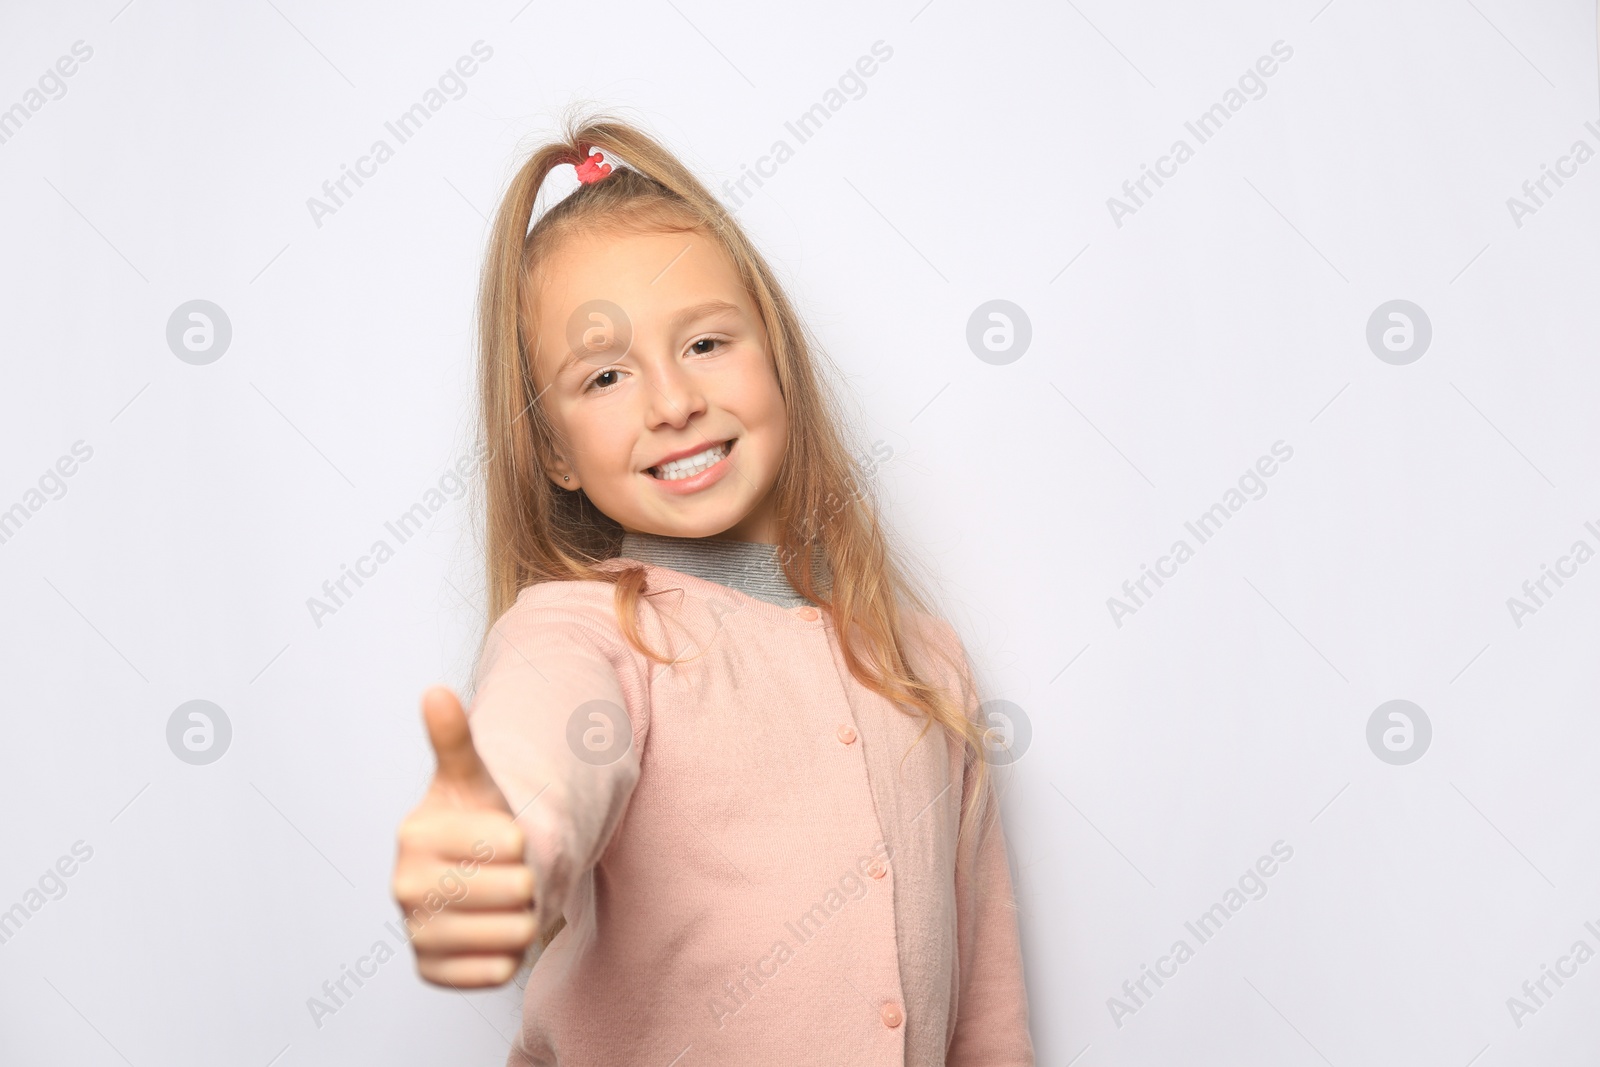 Photo of Happy little girl showing thumbs up on white background. Space for text